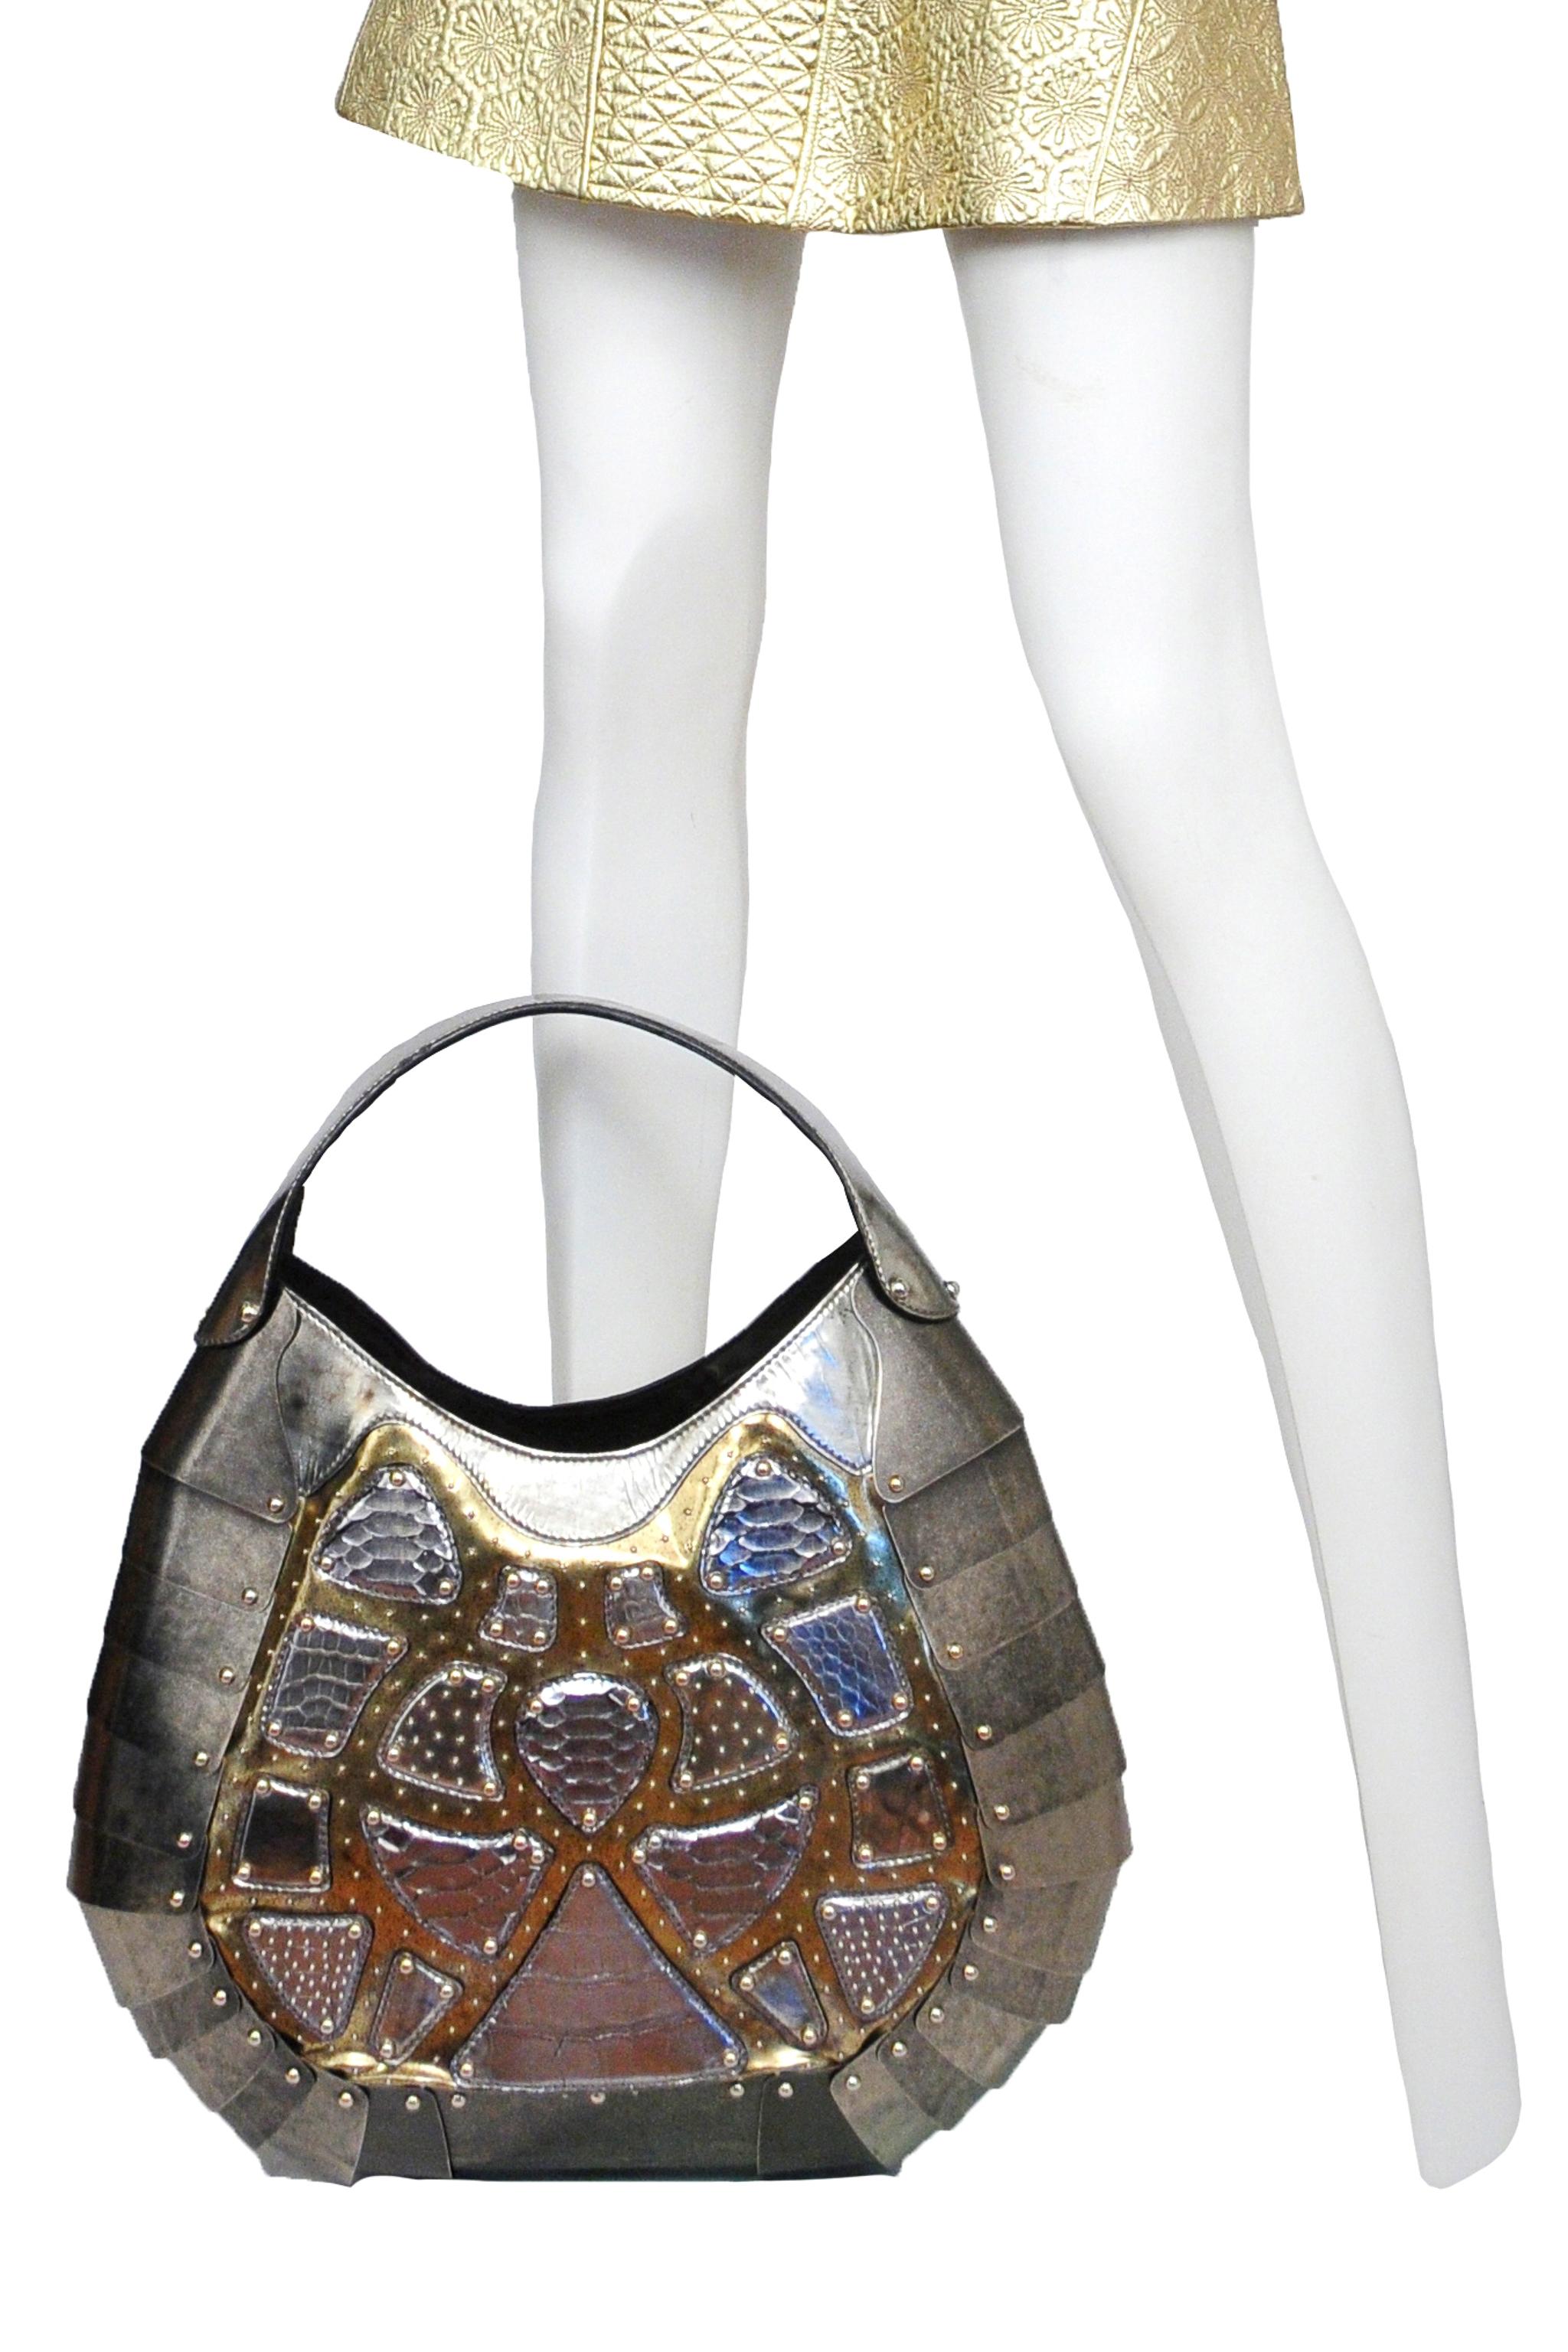 A highly rare and important one-of-a-kind silver exotic skins leather and tarnished silver colored metal giant scale handbag. In Memory Of Elizabeth How, Salem 1692 collection AW 2007. McQueen had bag made custom for and exhibition. The bag has only